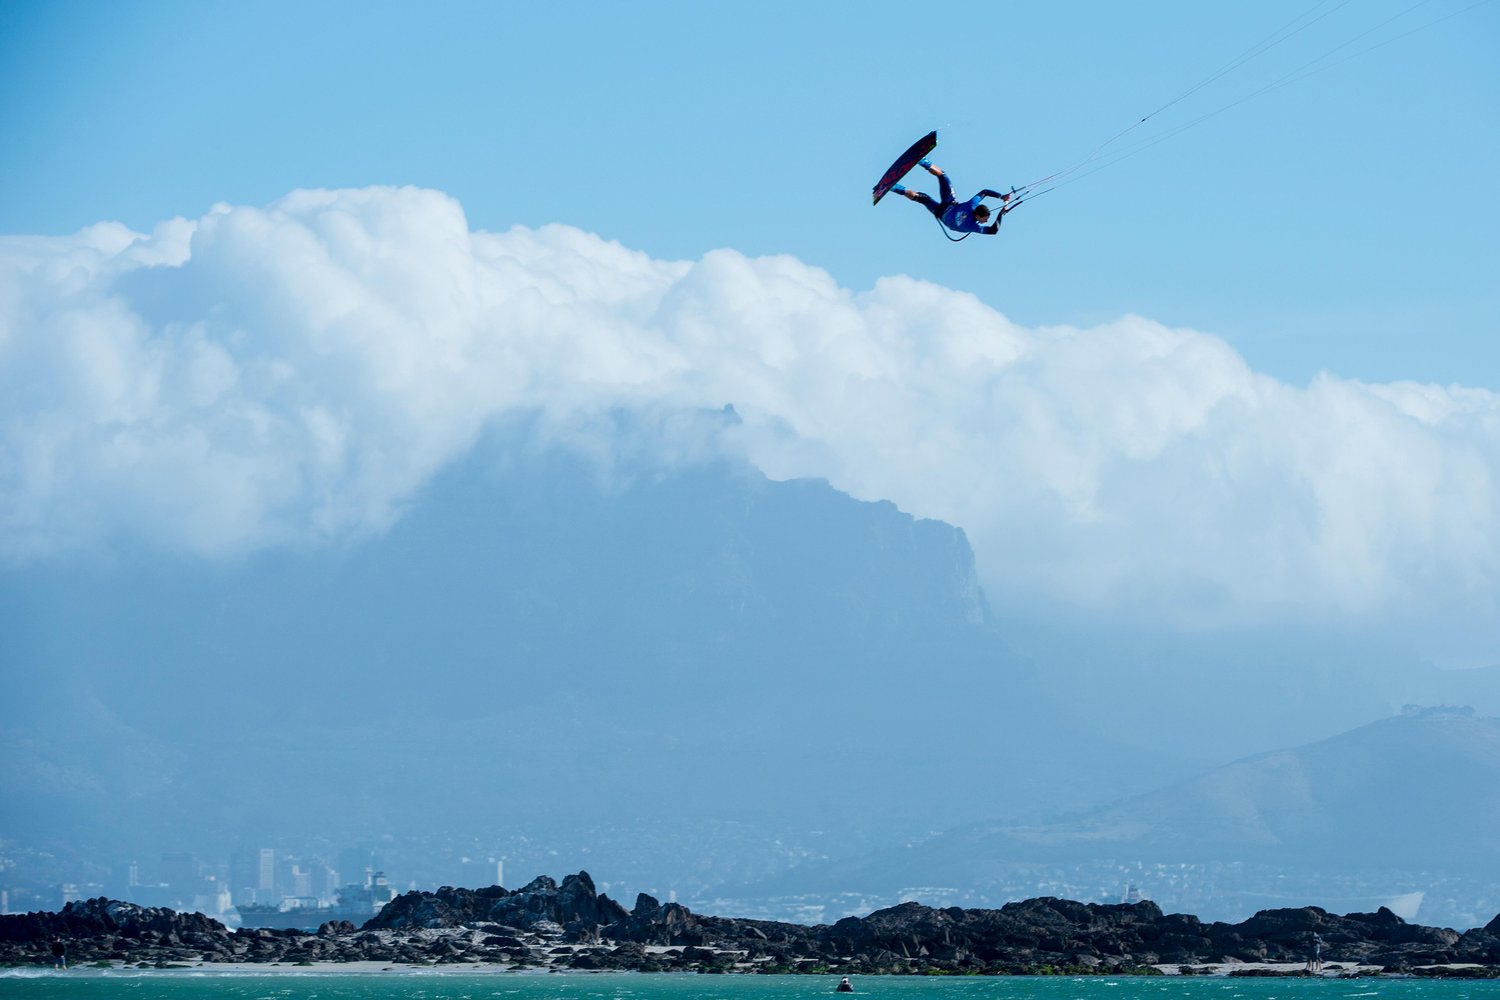  Kite Boarding  King of the Air  Cape Town RSA  Day 3   Live today